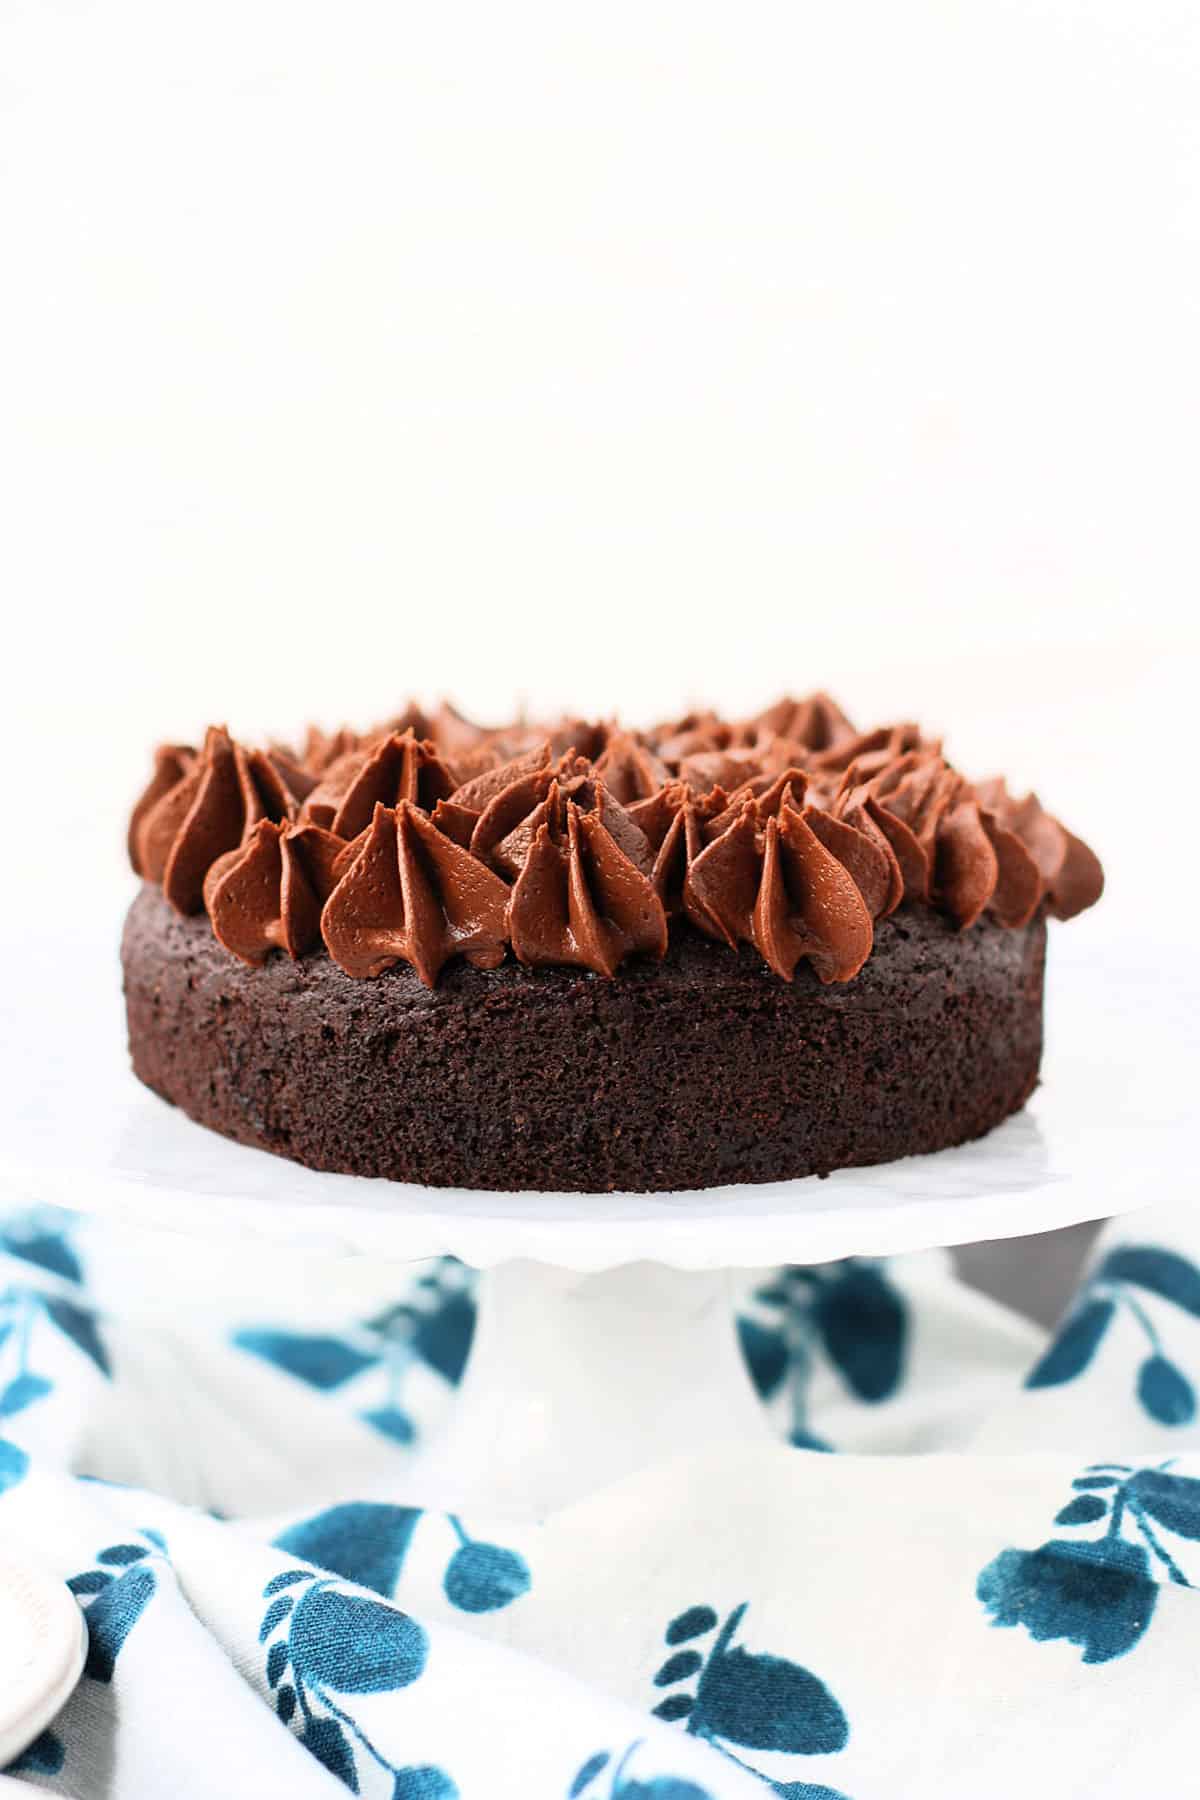 small gluten free chocolate cake on a small cake stand